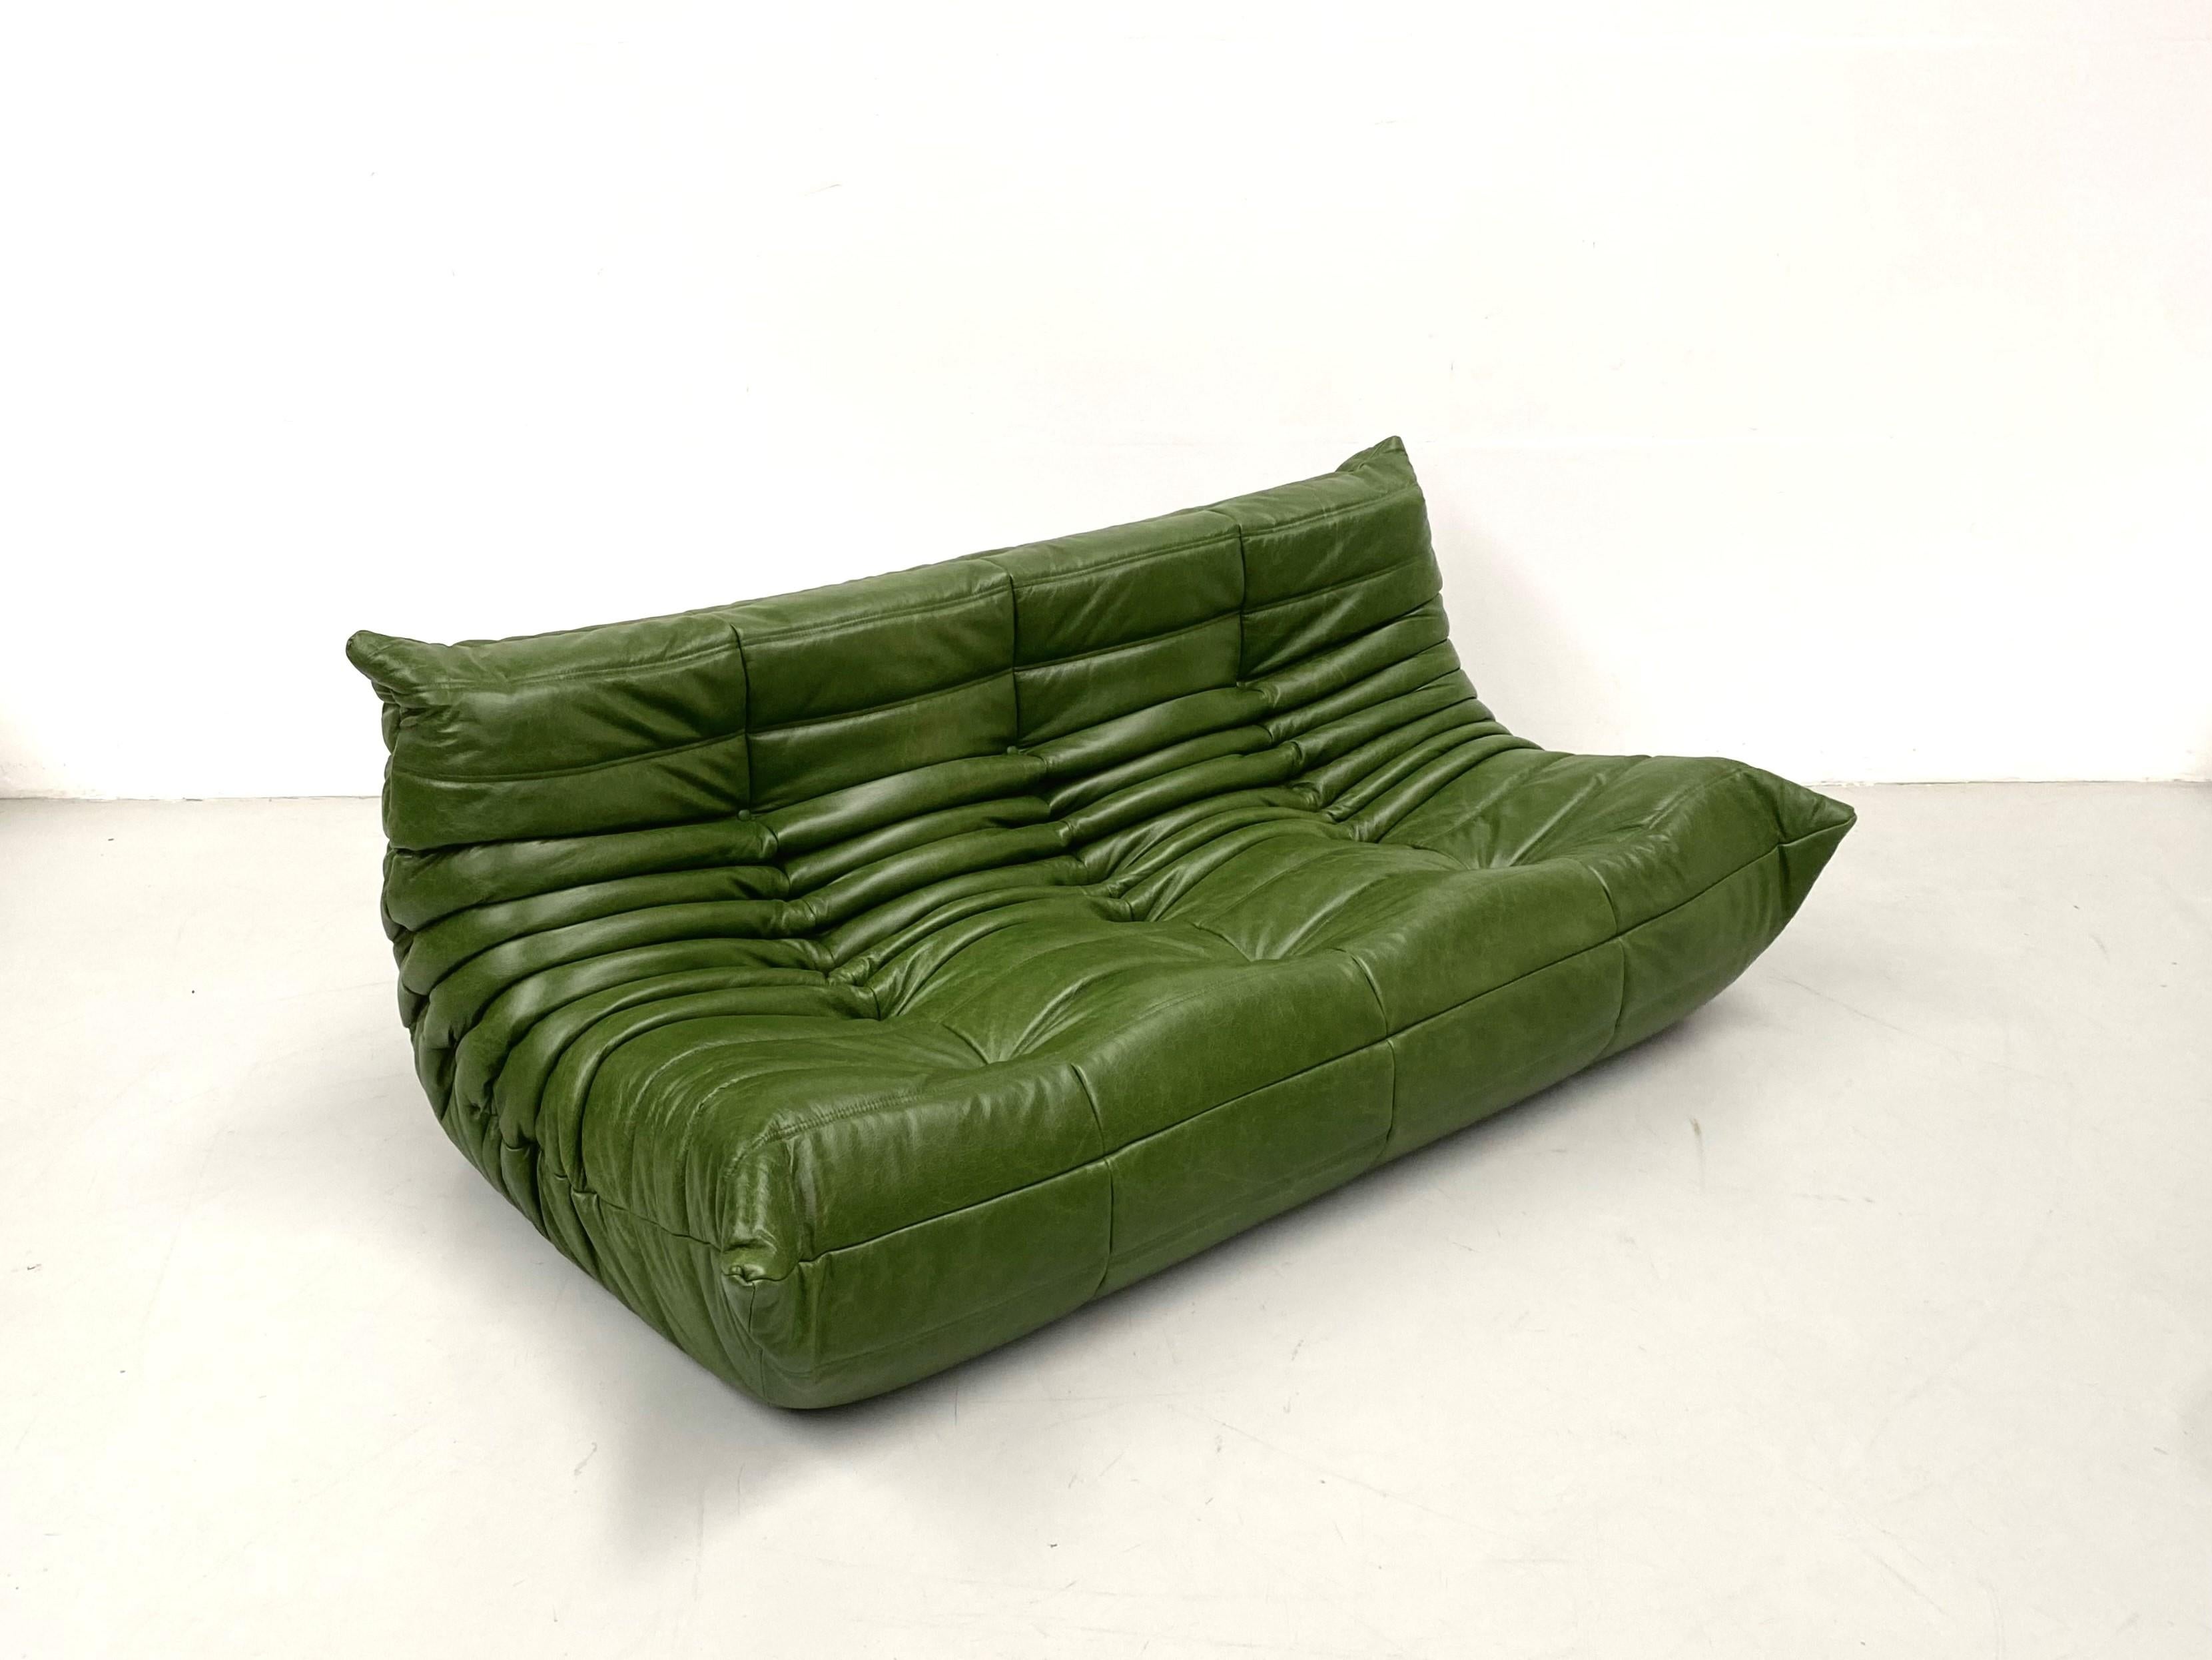 Vintage French Togo Sofa in Green Leather by Michel Ducaroy for Ligne Roset 3